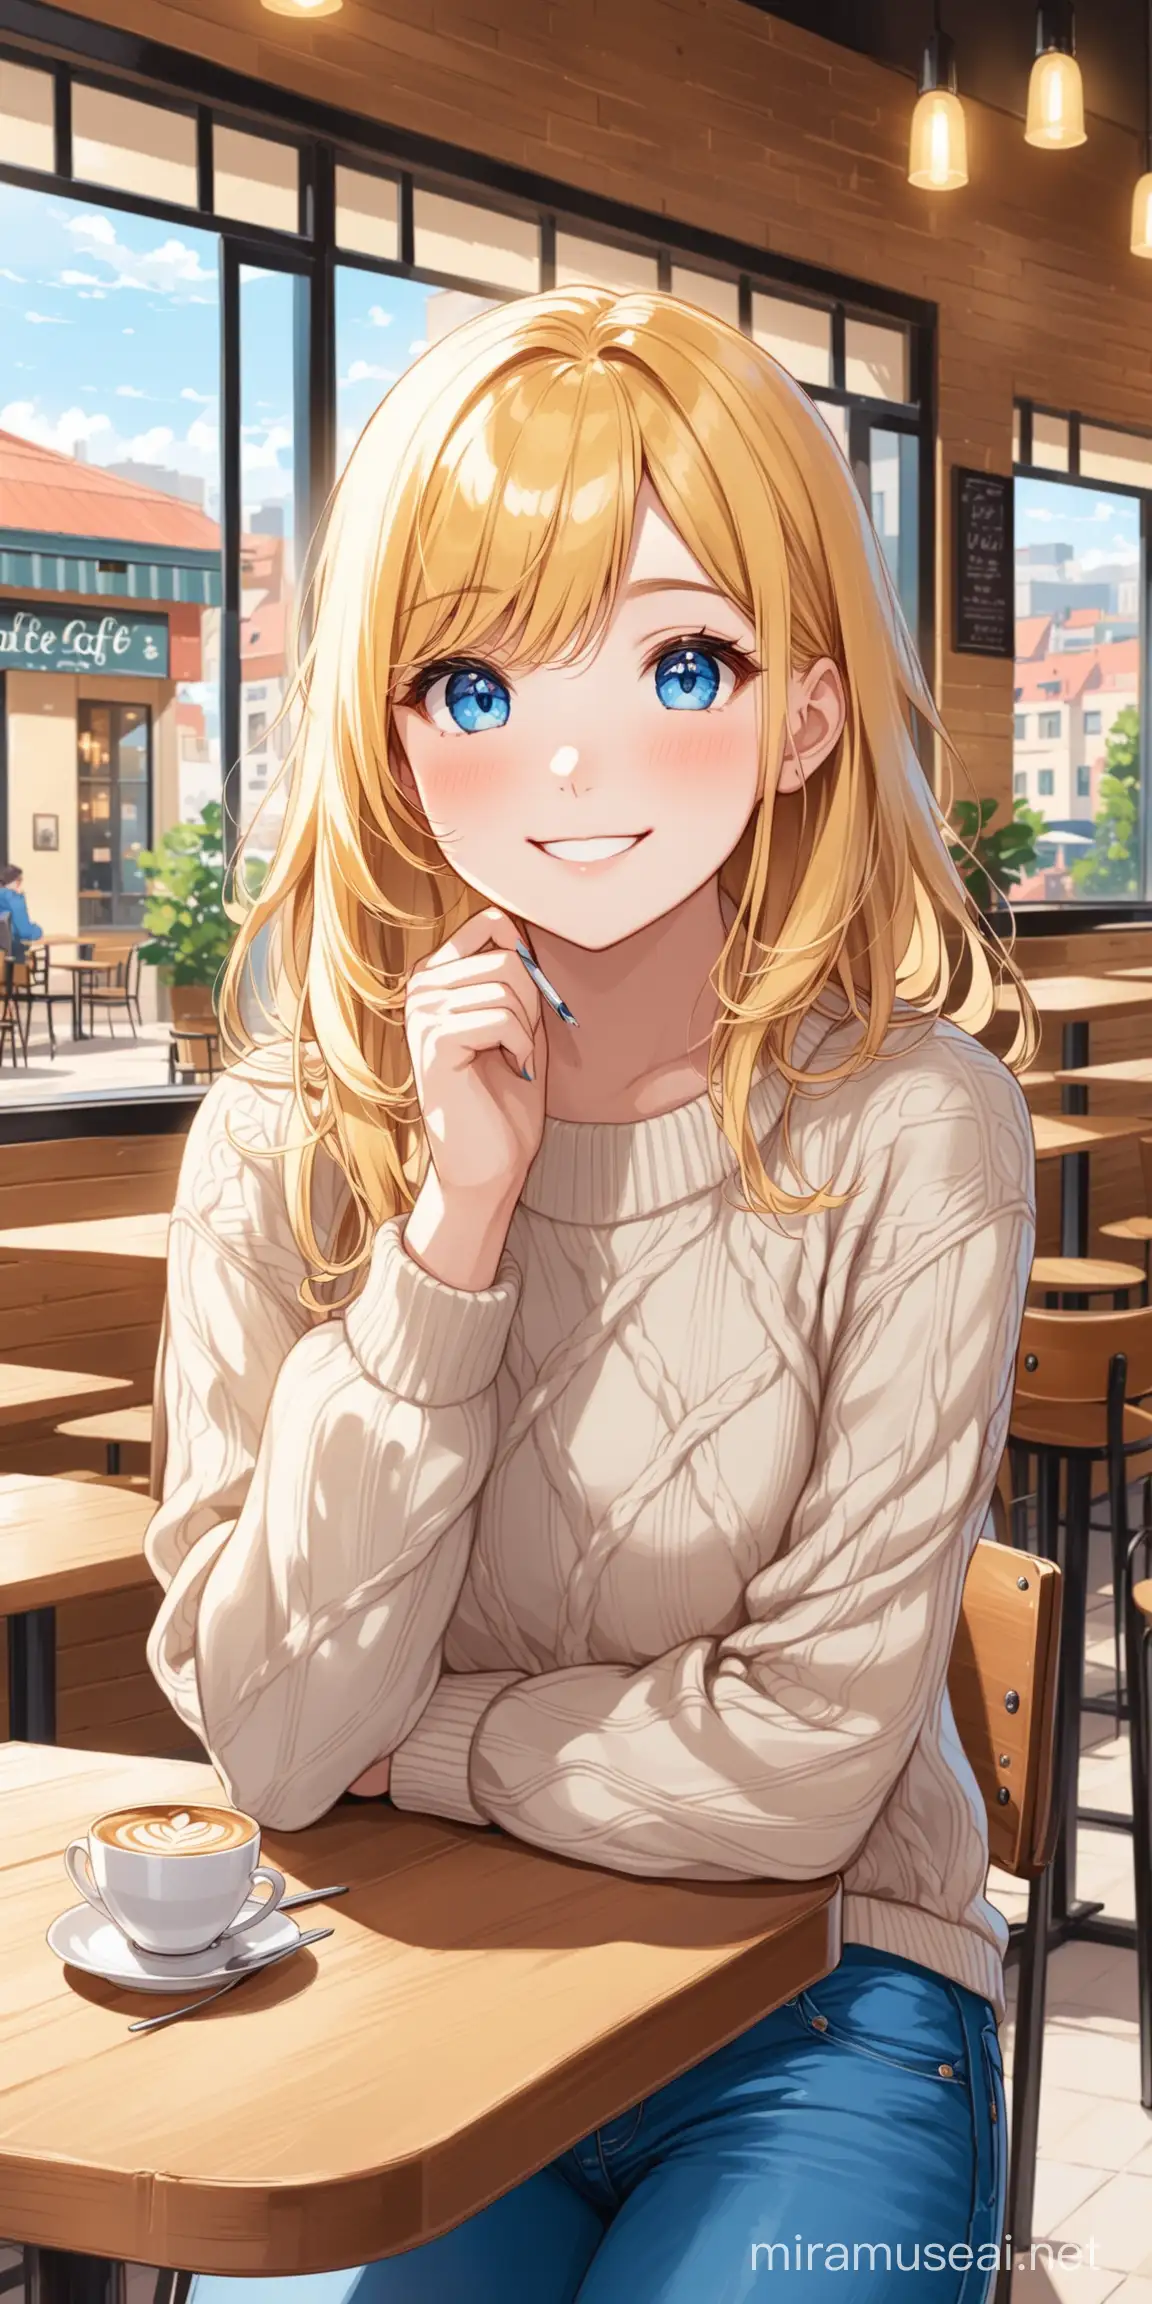 student, blue jeans, sweater, blonde hair, blue eyes, art, cafe background, smiling